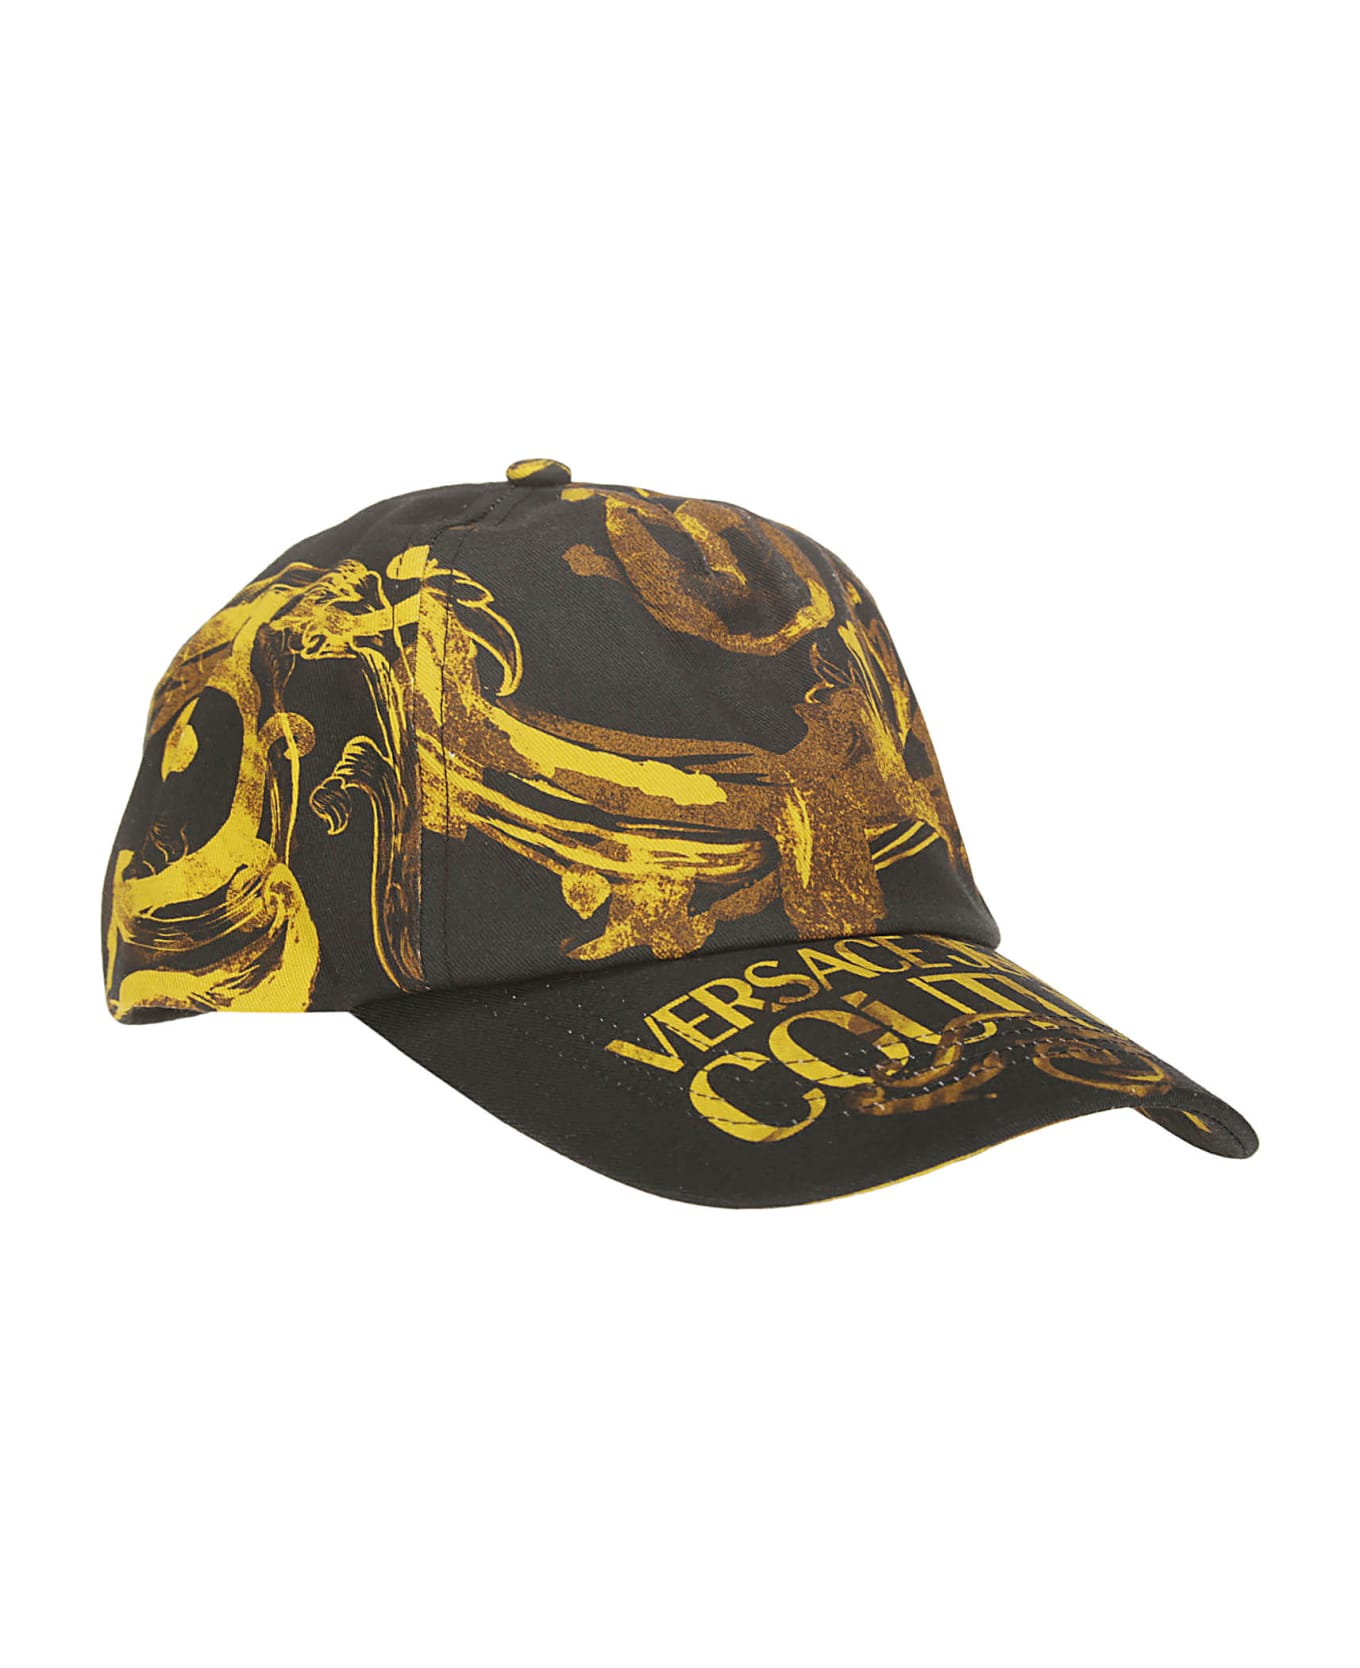 Versace Jeans Couture Baseball Cap With Pences Hat - BLACK/GOLD 帽子